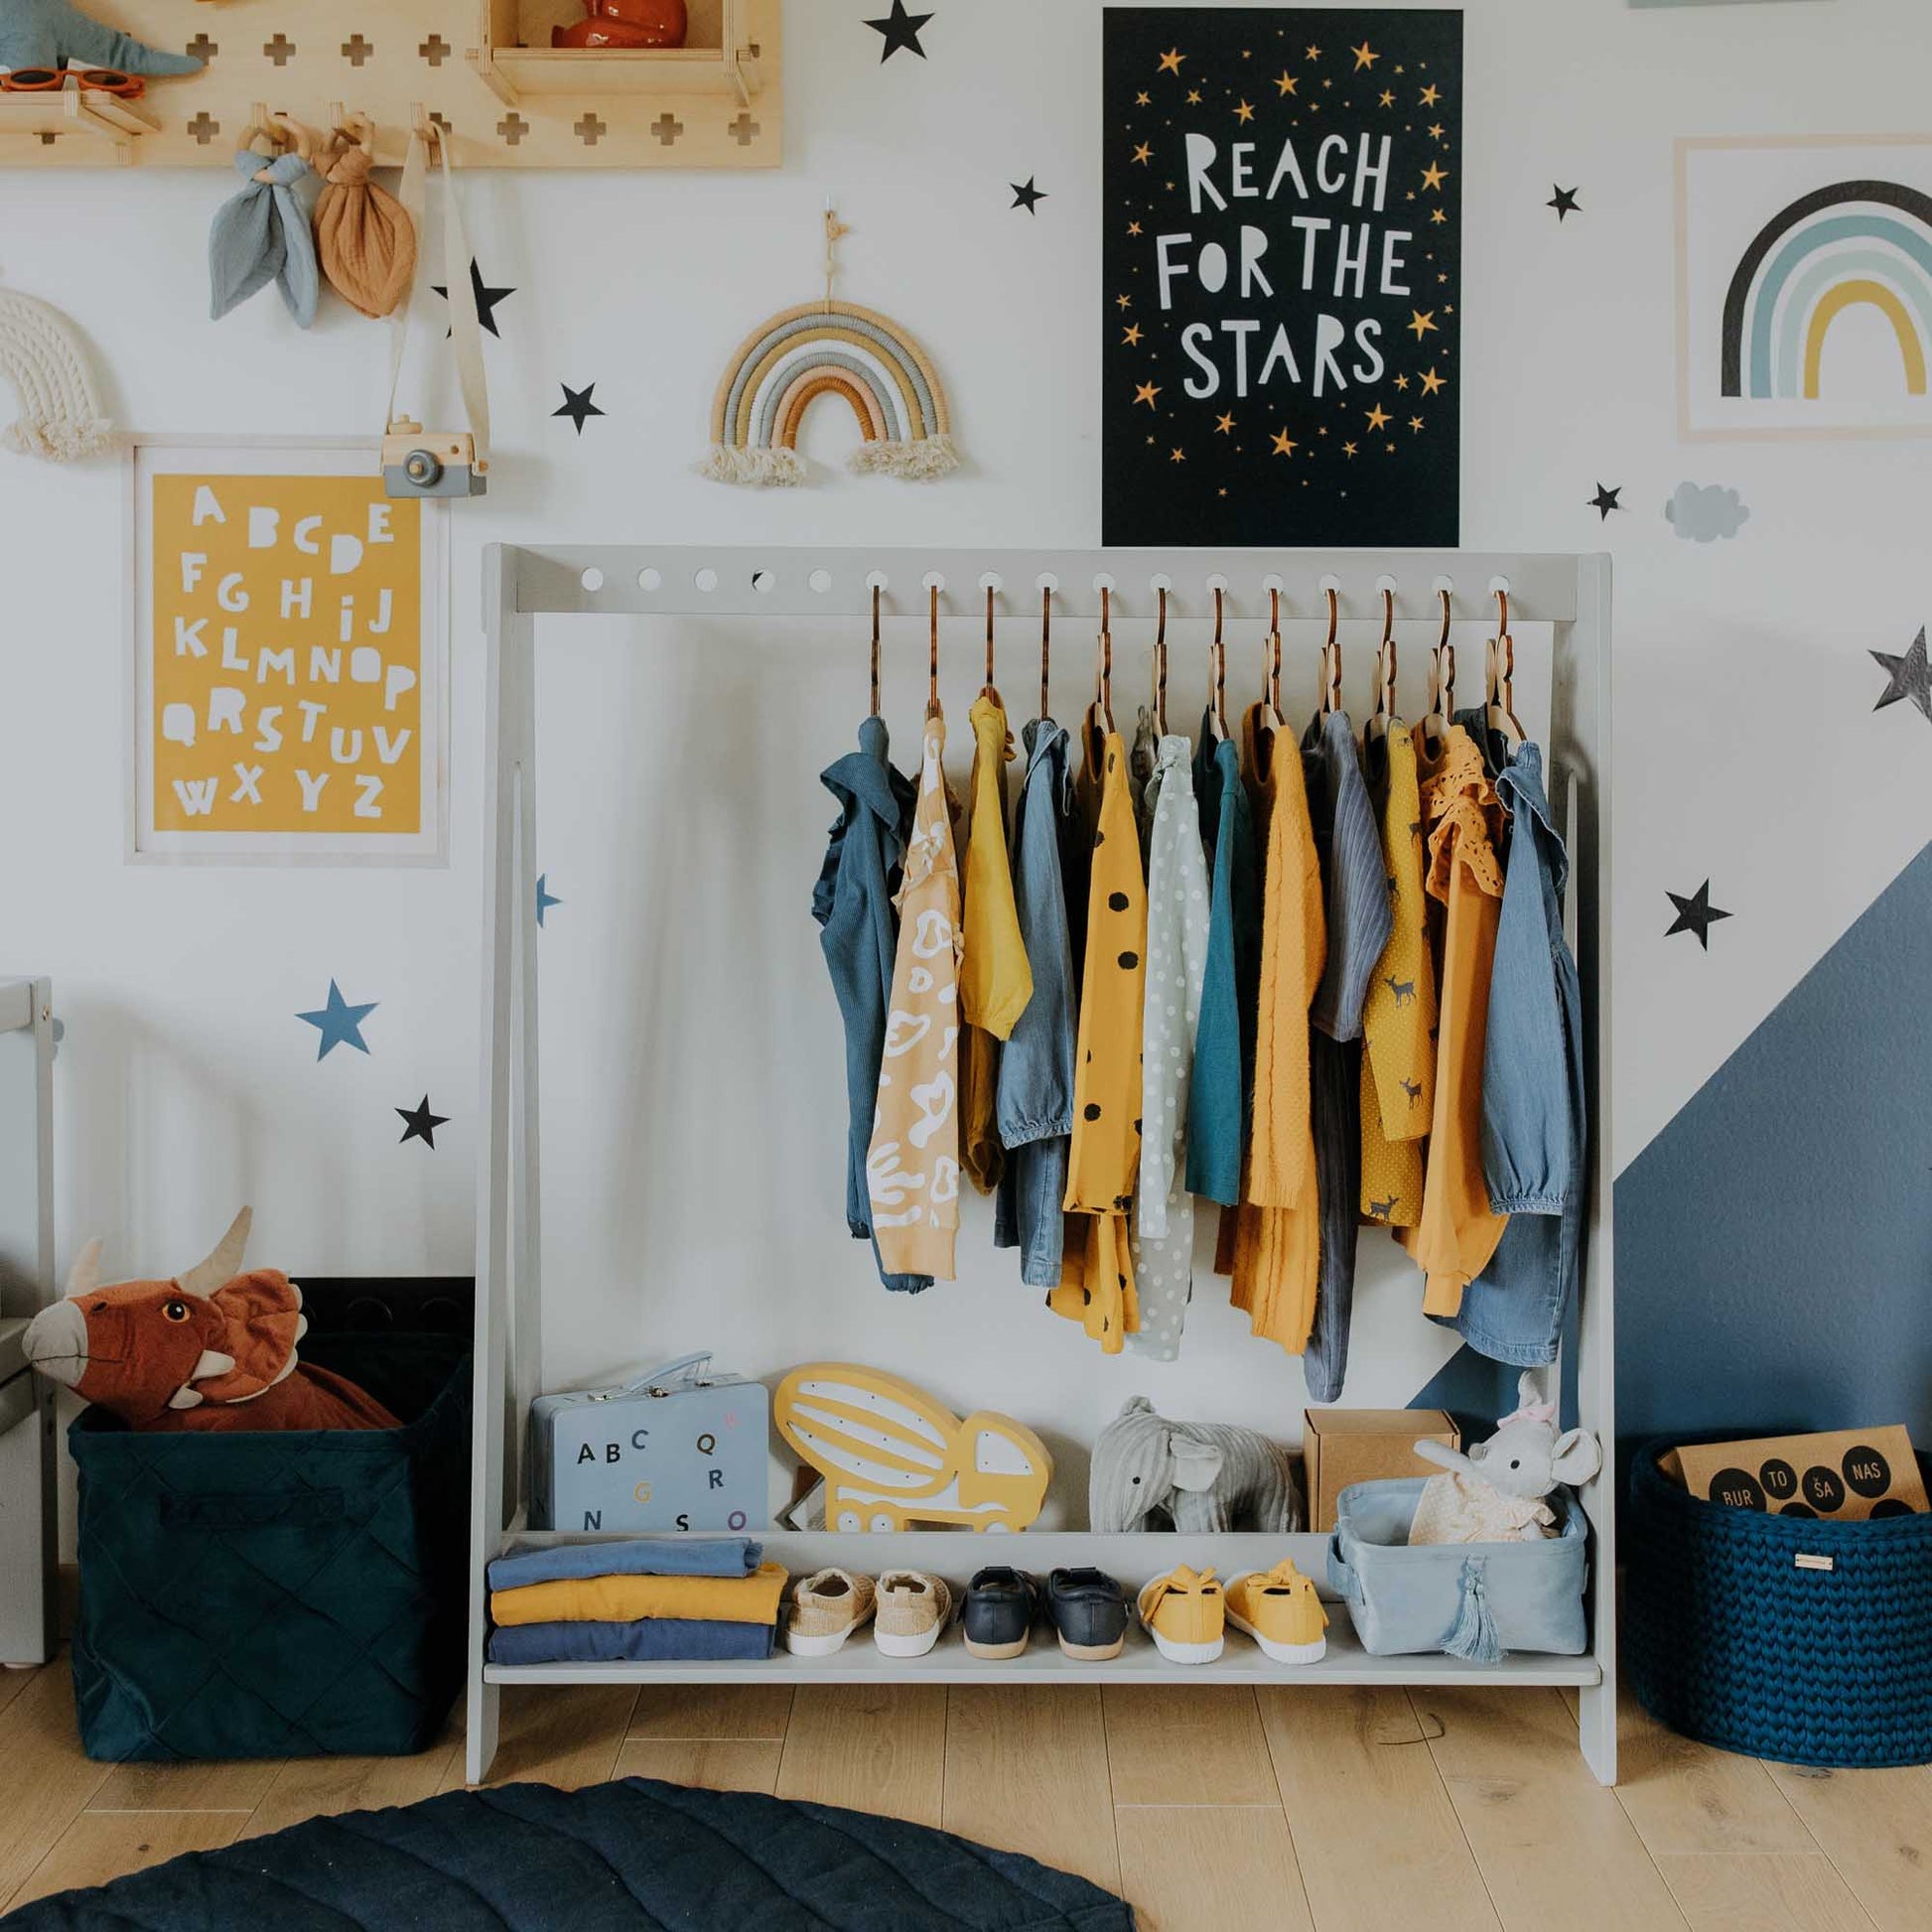 A child's room with an A-frame kids' clothing rack from Sweet Home From Wood, blue, yellow walls, and stars on the wall.